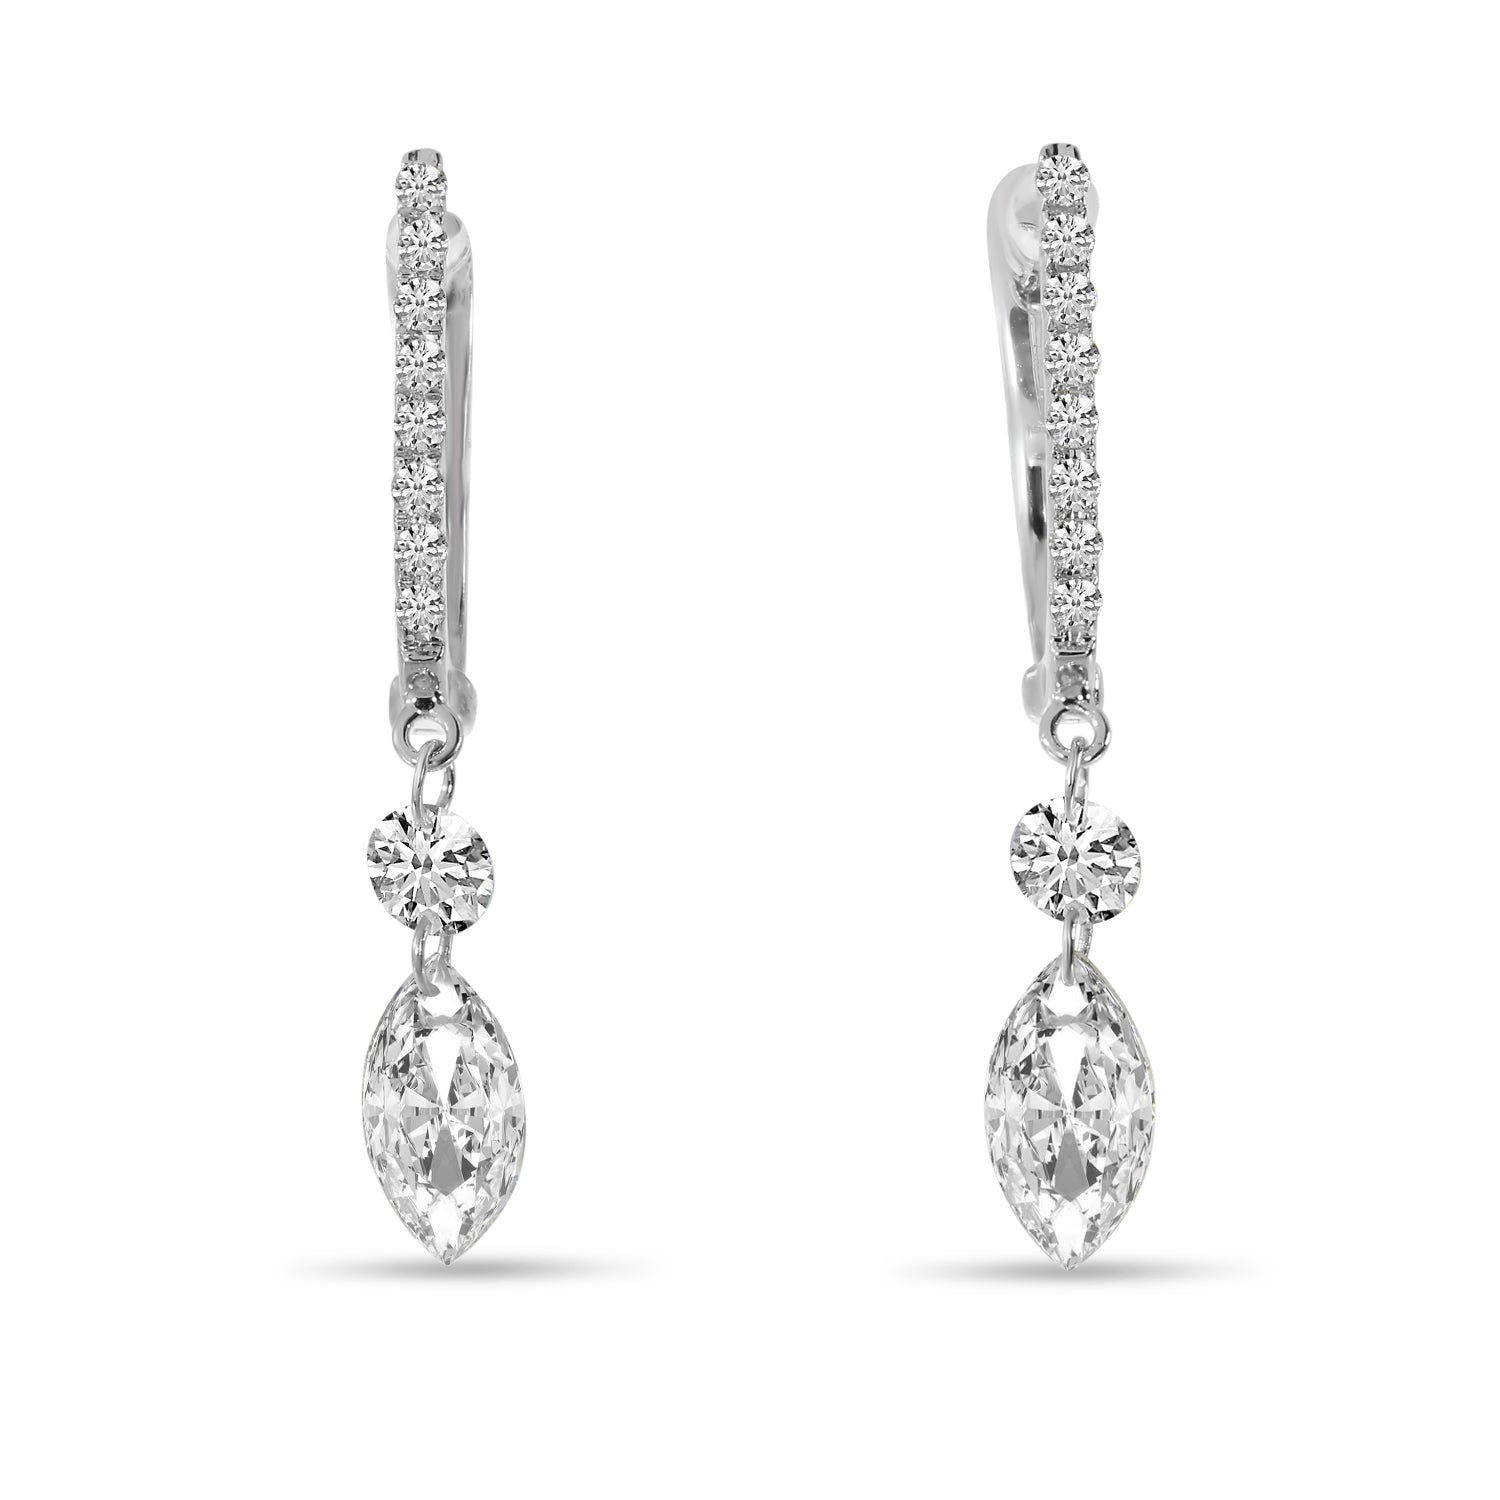 These mesmerizing diamonds sparkle and dance, ever-moving in joyful rhythms. Flawlessly set in 14k white gold, these Round graduated and fancy marquise cut diamonds total 1.13 cts. Enjoy their captivating swirls with modern lever back earrings, measuring 28.00mm in length.